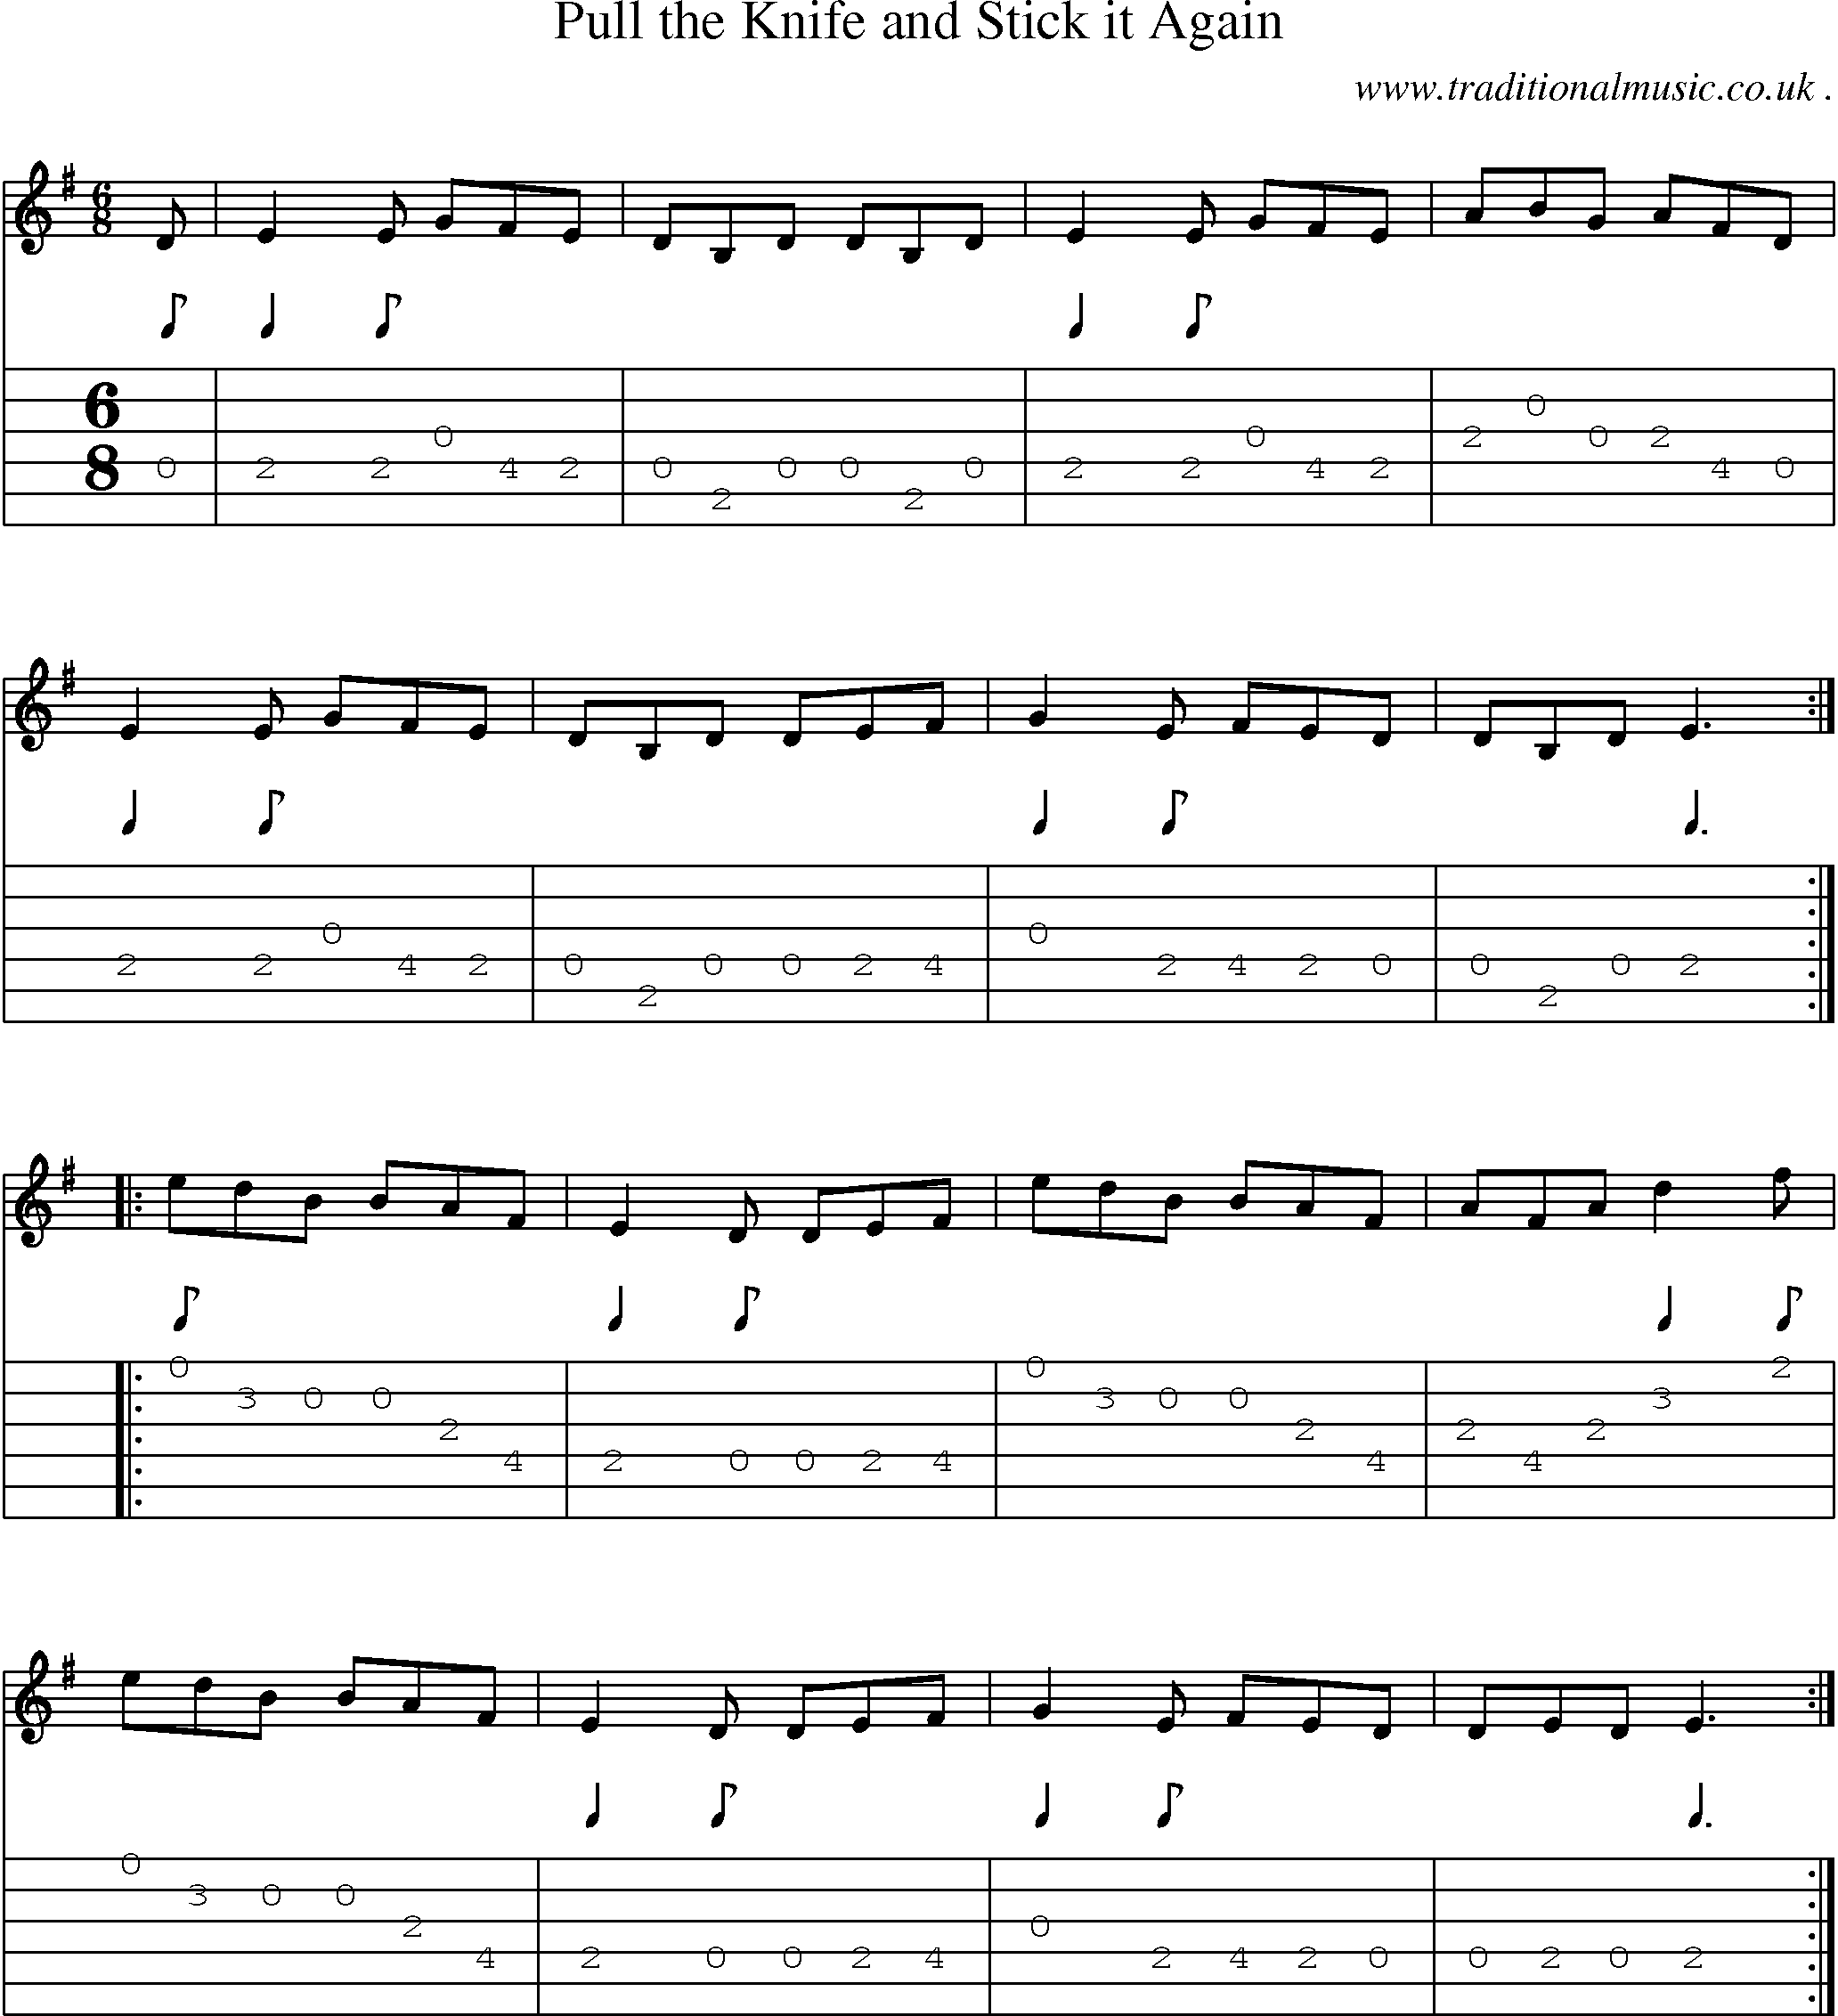 Sheet-Music and Guitar Tabs for Pull The Knife And Stick It Again